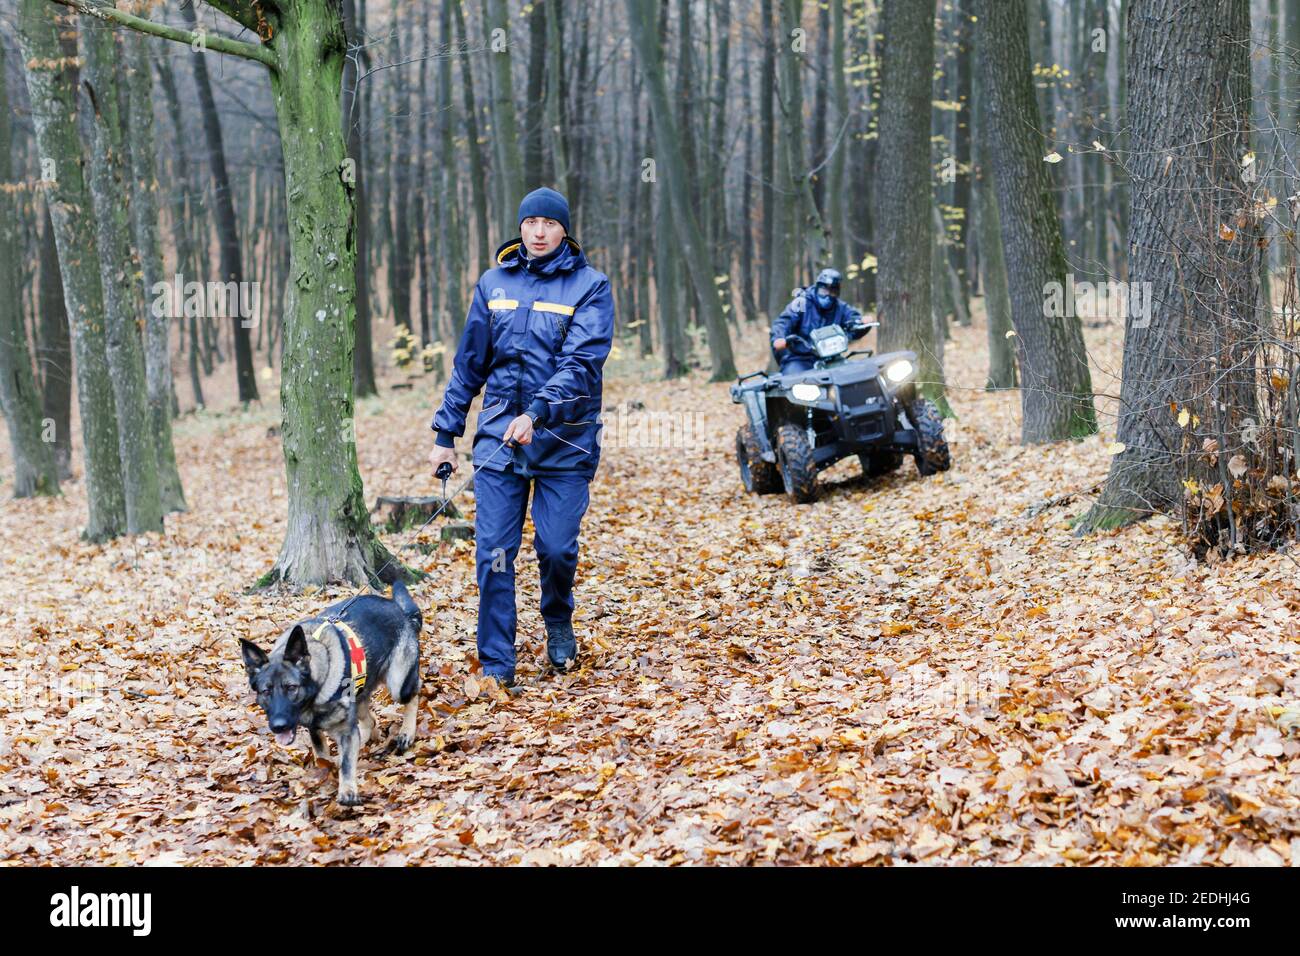 A rescuer with a dog on a leash searches in the woods, a rescuer on an ATV also searches. Search for a man in the woods Stock Photo